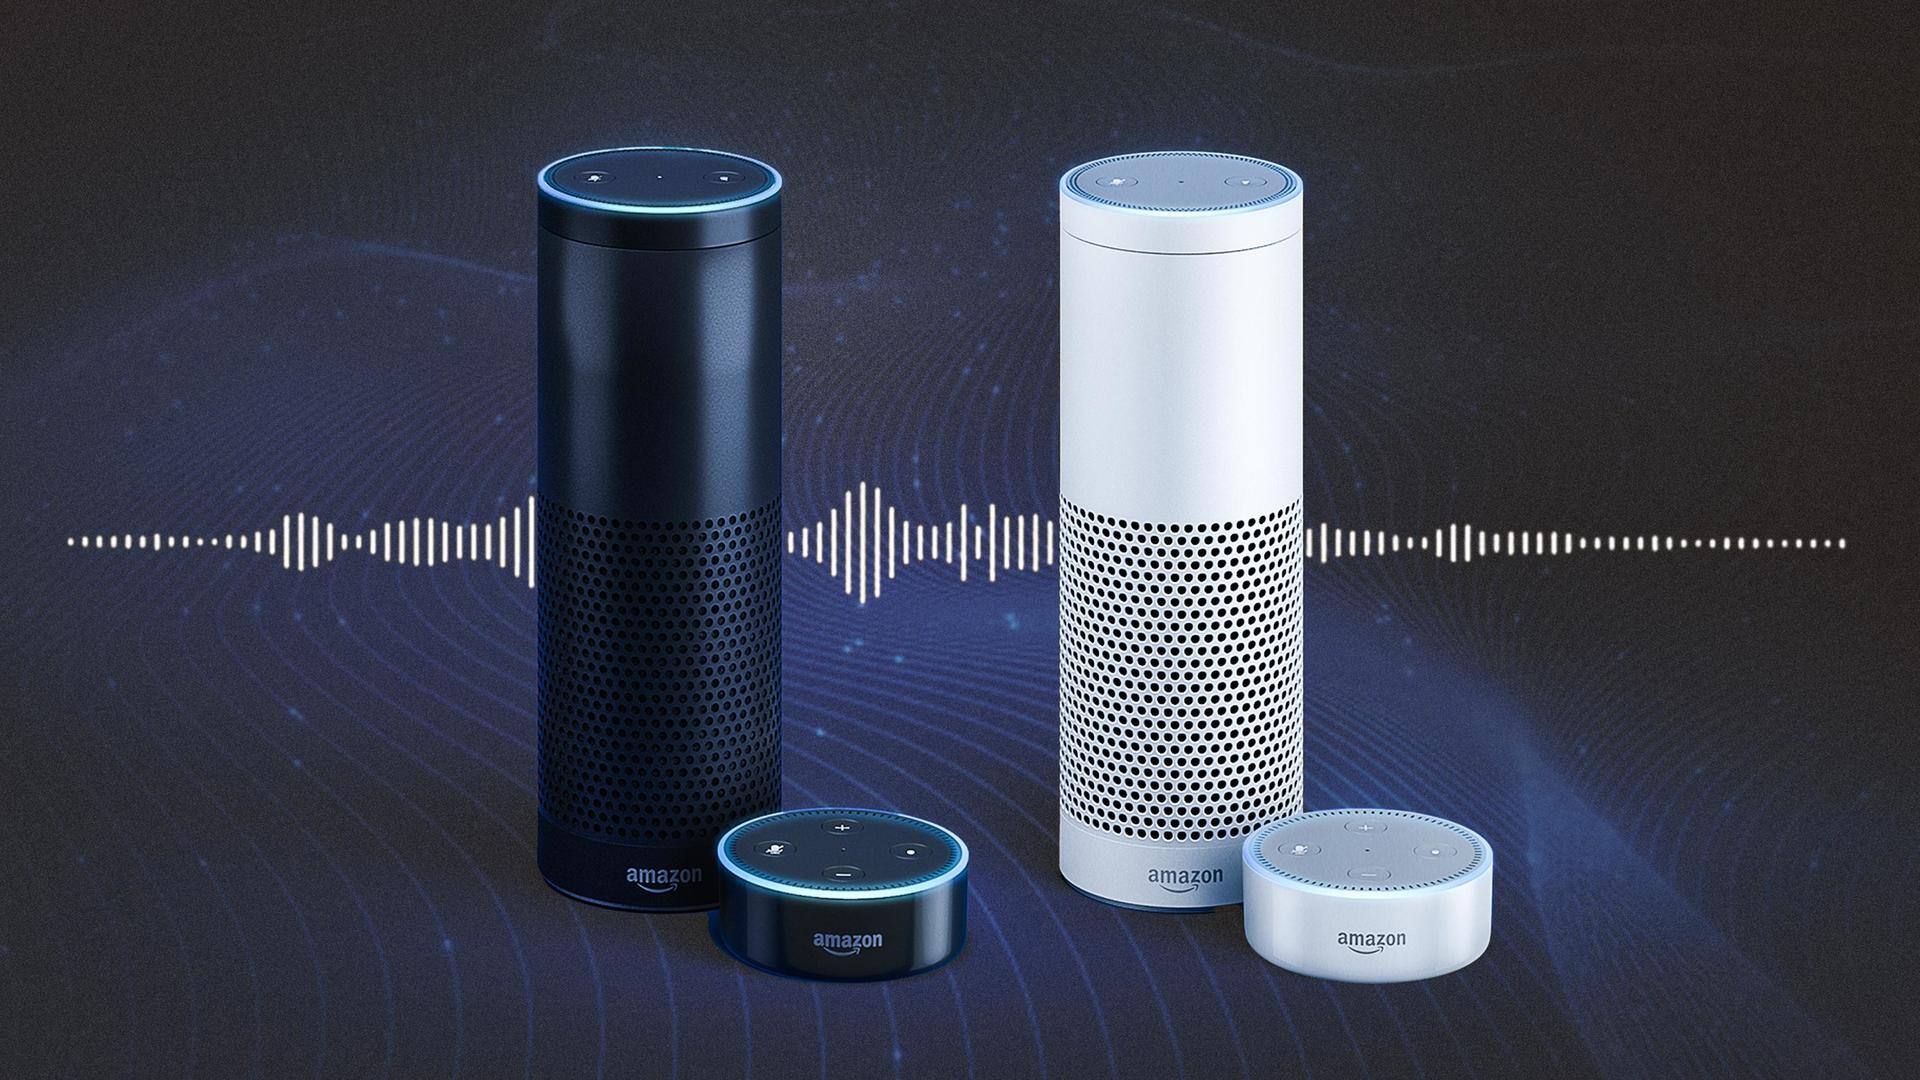 How Amazon plans to revamp Alexa with AI chatbot technology